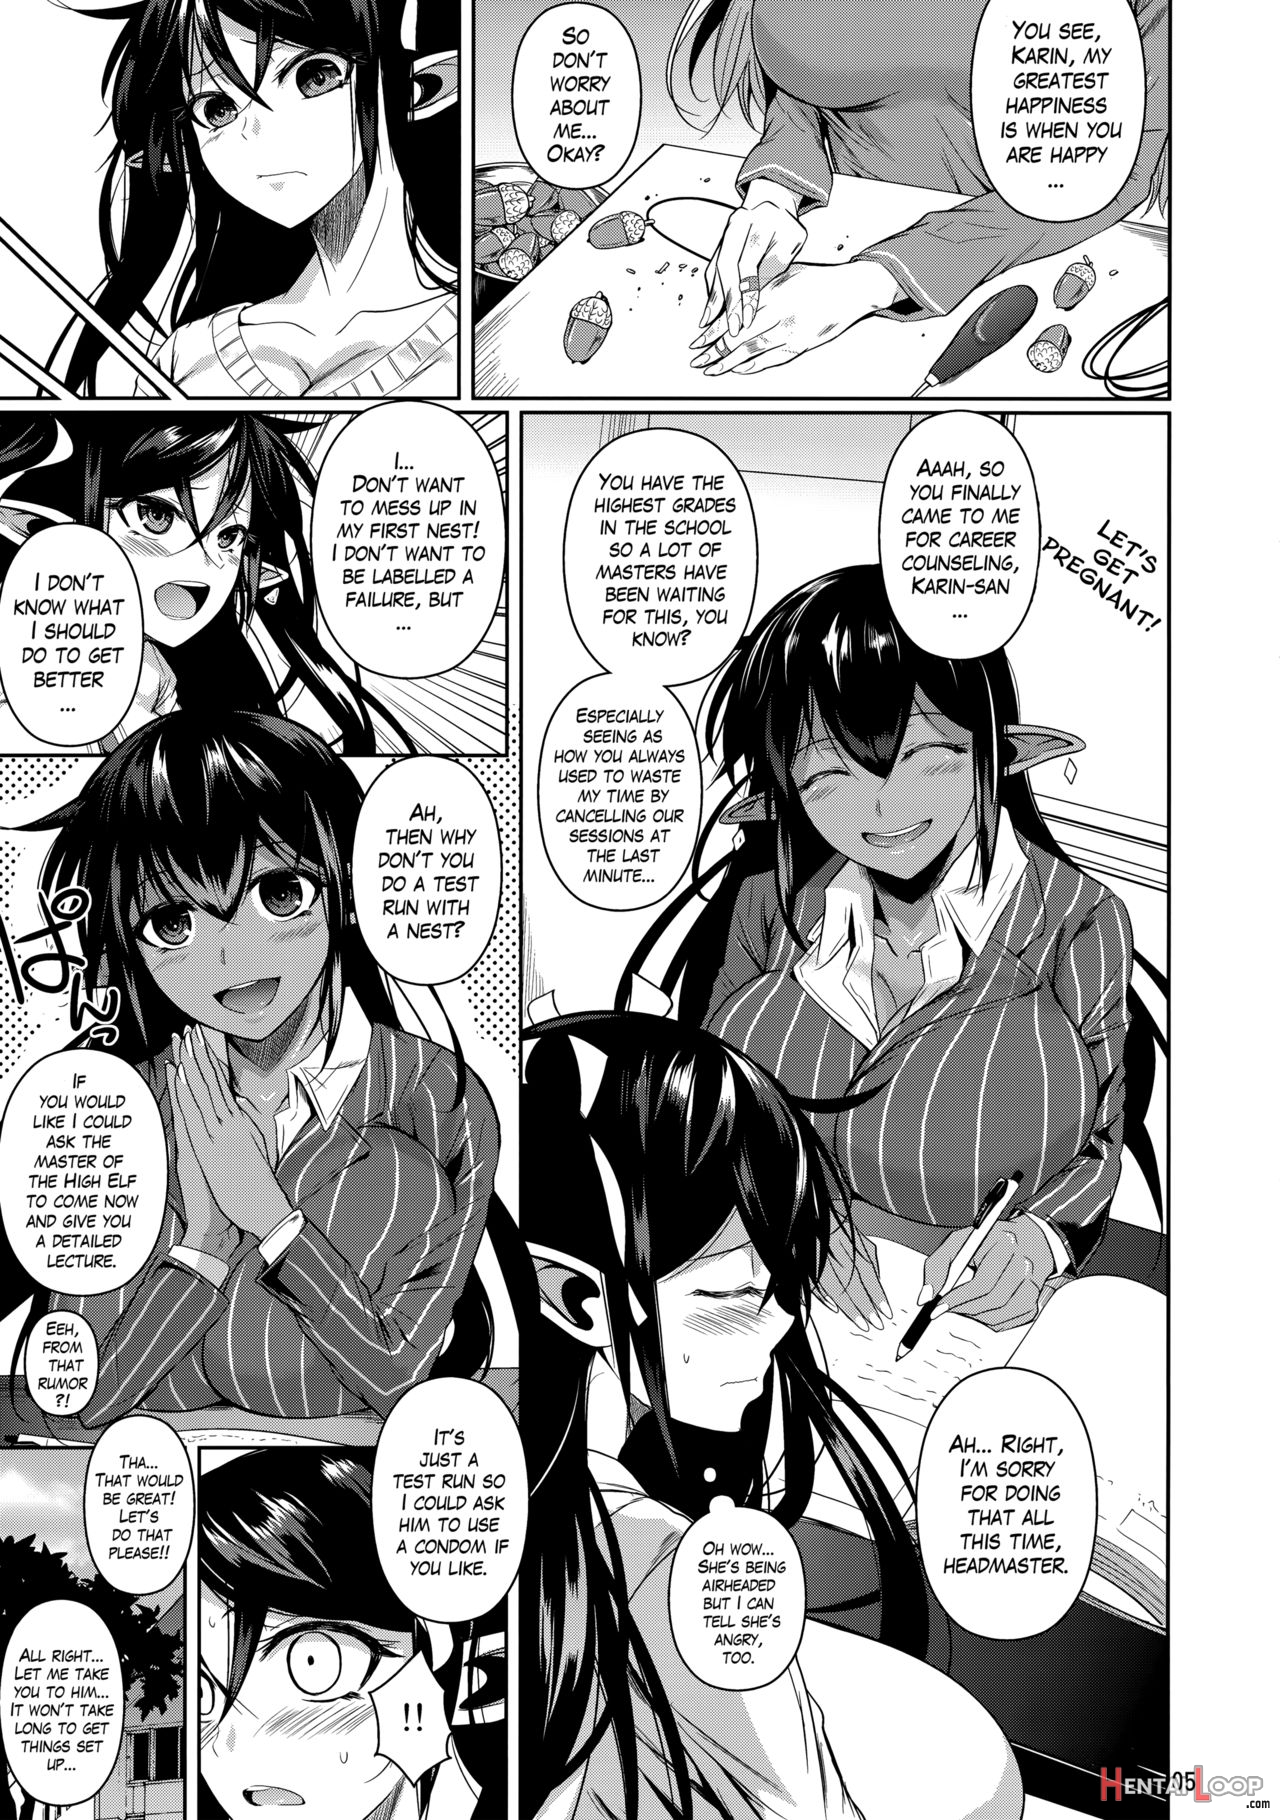 High Elf × High School Twintail - Decensored page 4